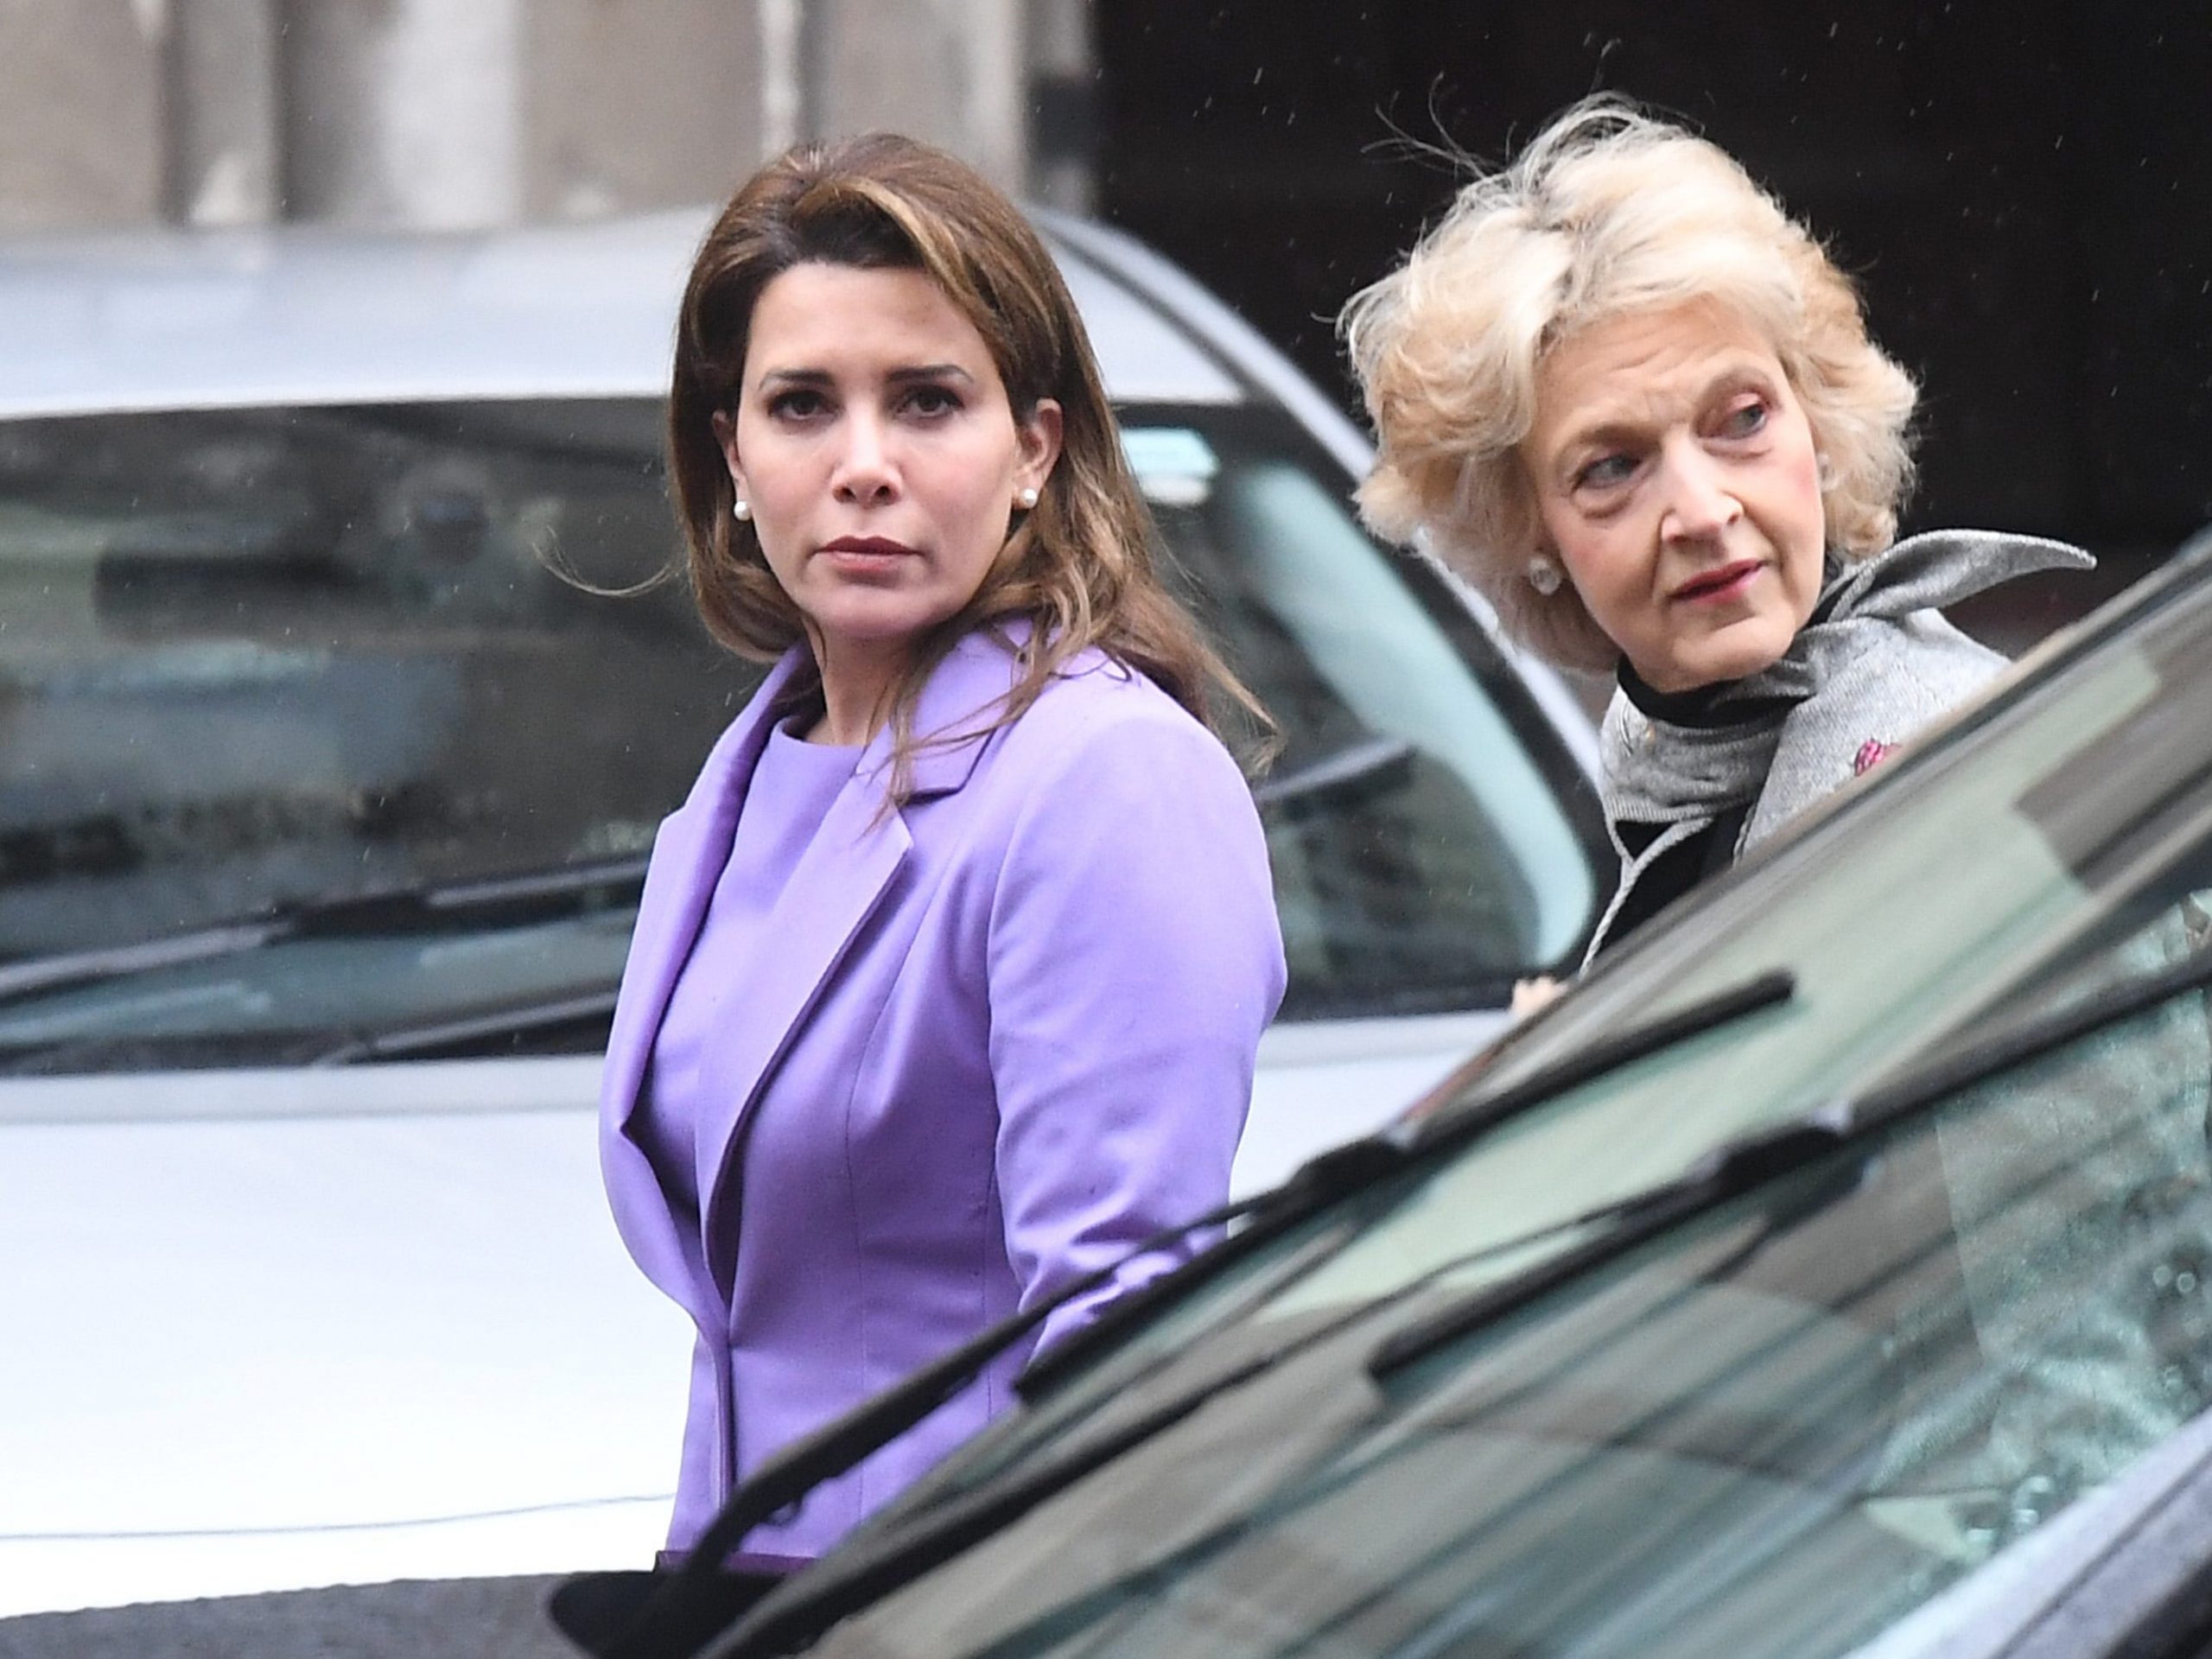 rincess Haya Bint al-Hussein arrives with her lawyer Baroness Fiona Shackleton at the High Court on February 28, 2020.